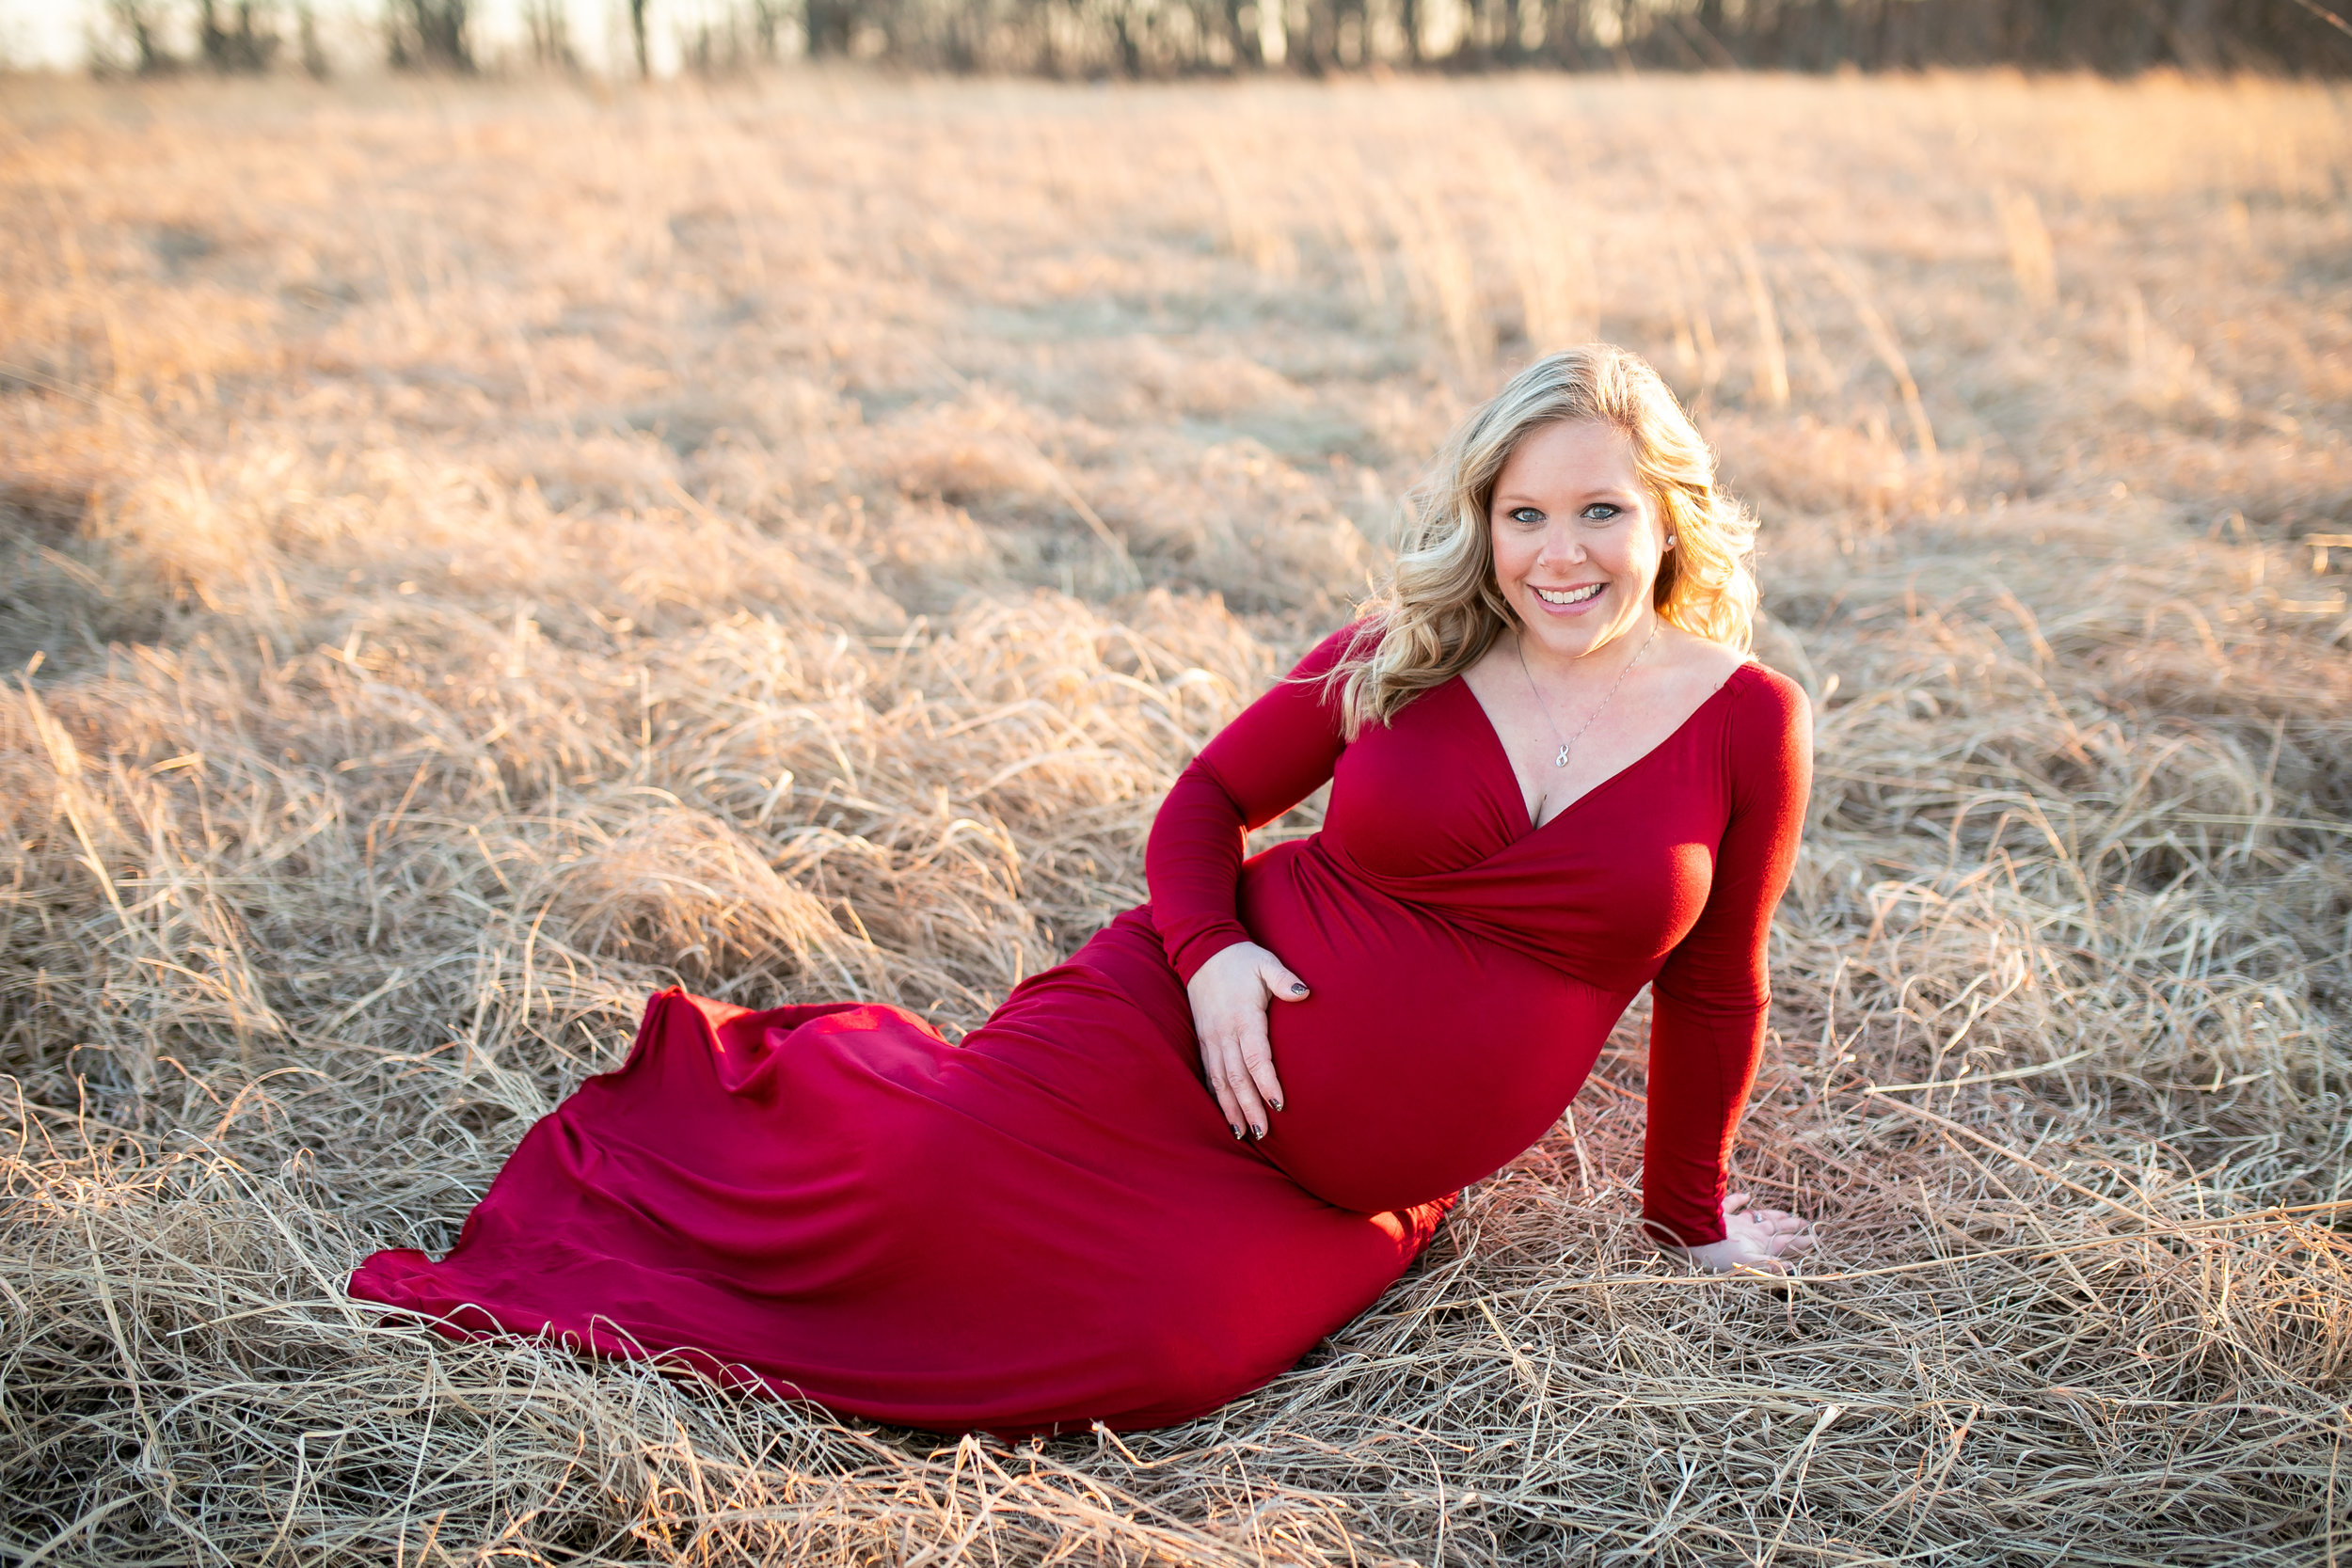 South Jersey Maternity Photographer, South Jersey Maternity Photography